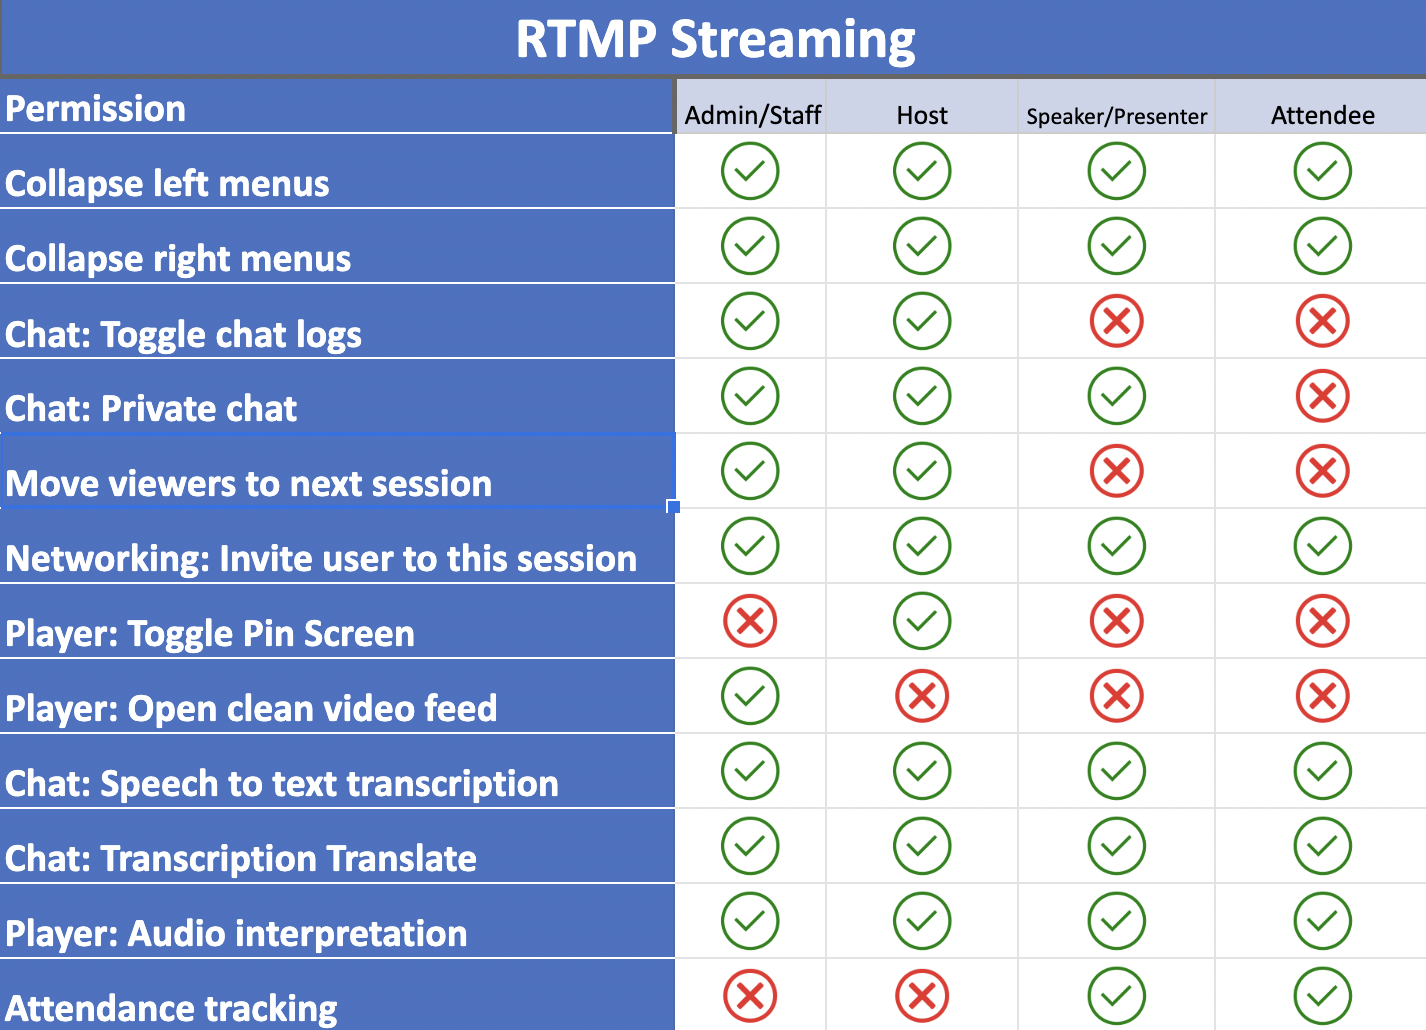 Table showing what each permission level can do in RTMP Streaming